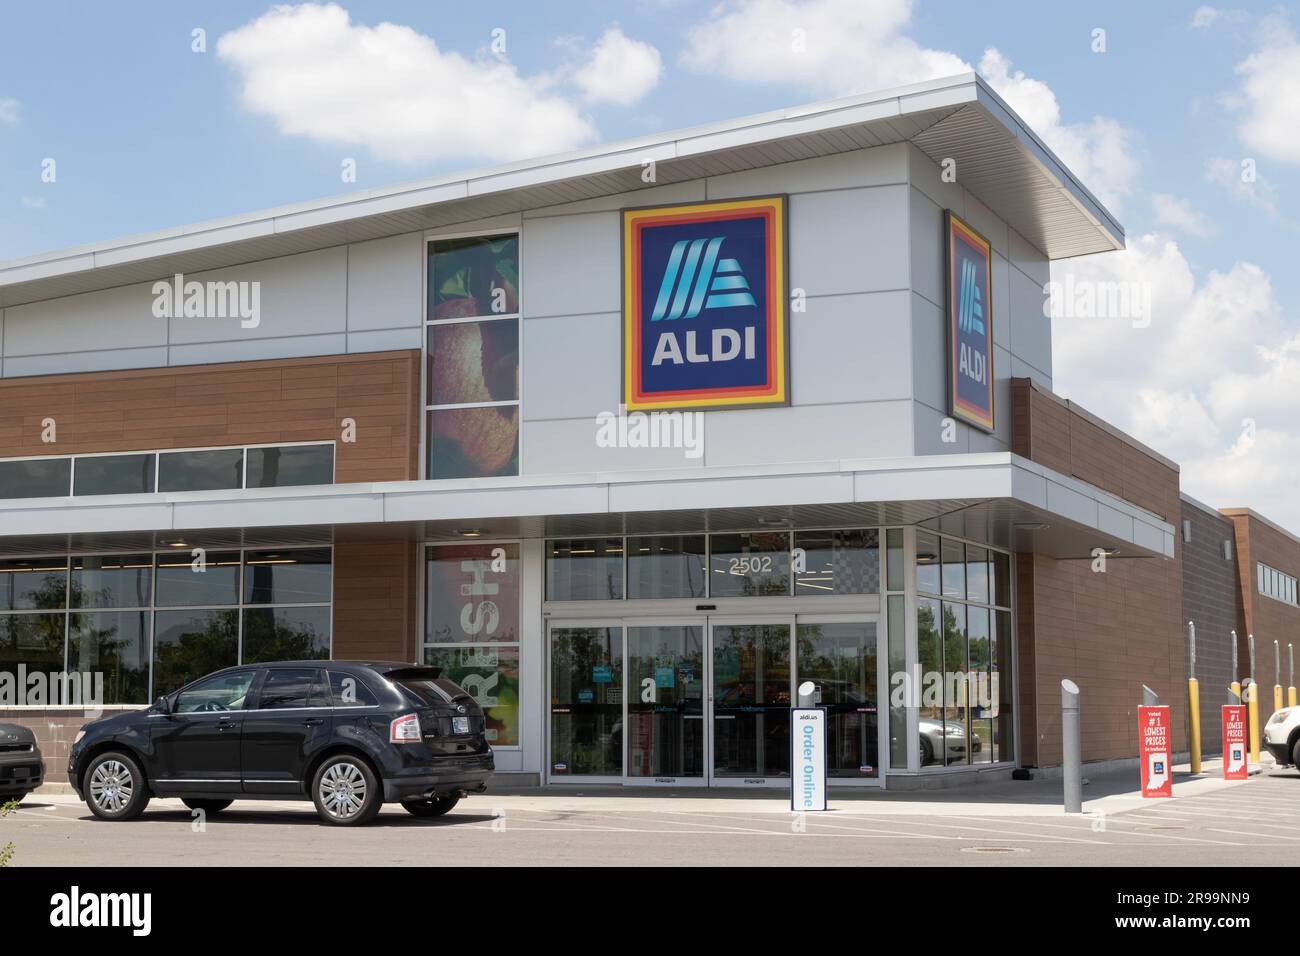 Indianapolis - June 24, 2023: Aldi Discount Supermarket. Aldi sells a range of grocery items, including produce, meat and dairy at discount prices. Stock Photo